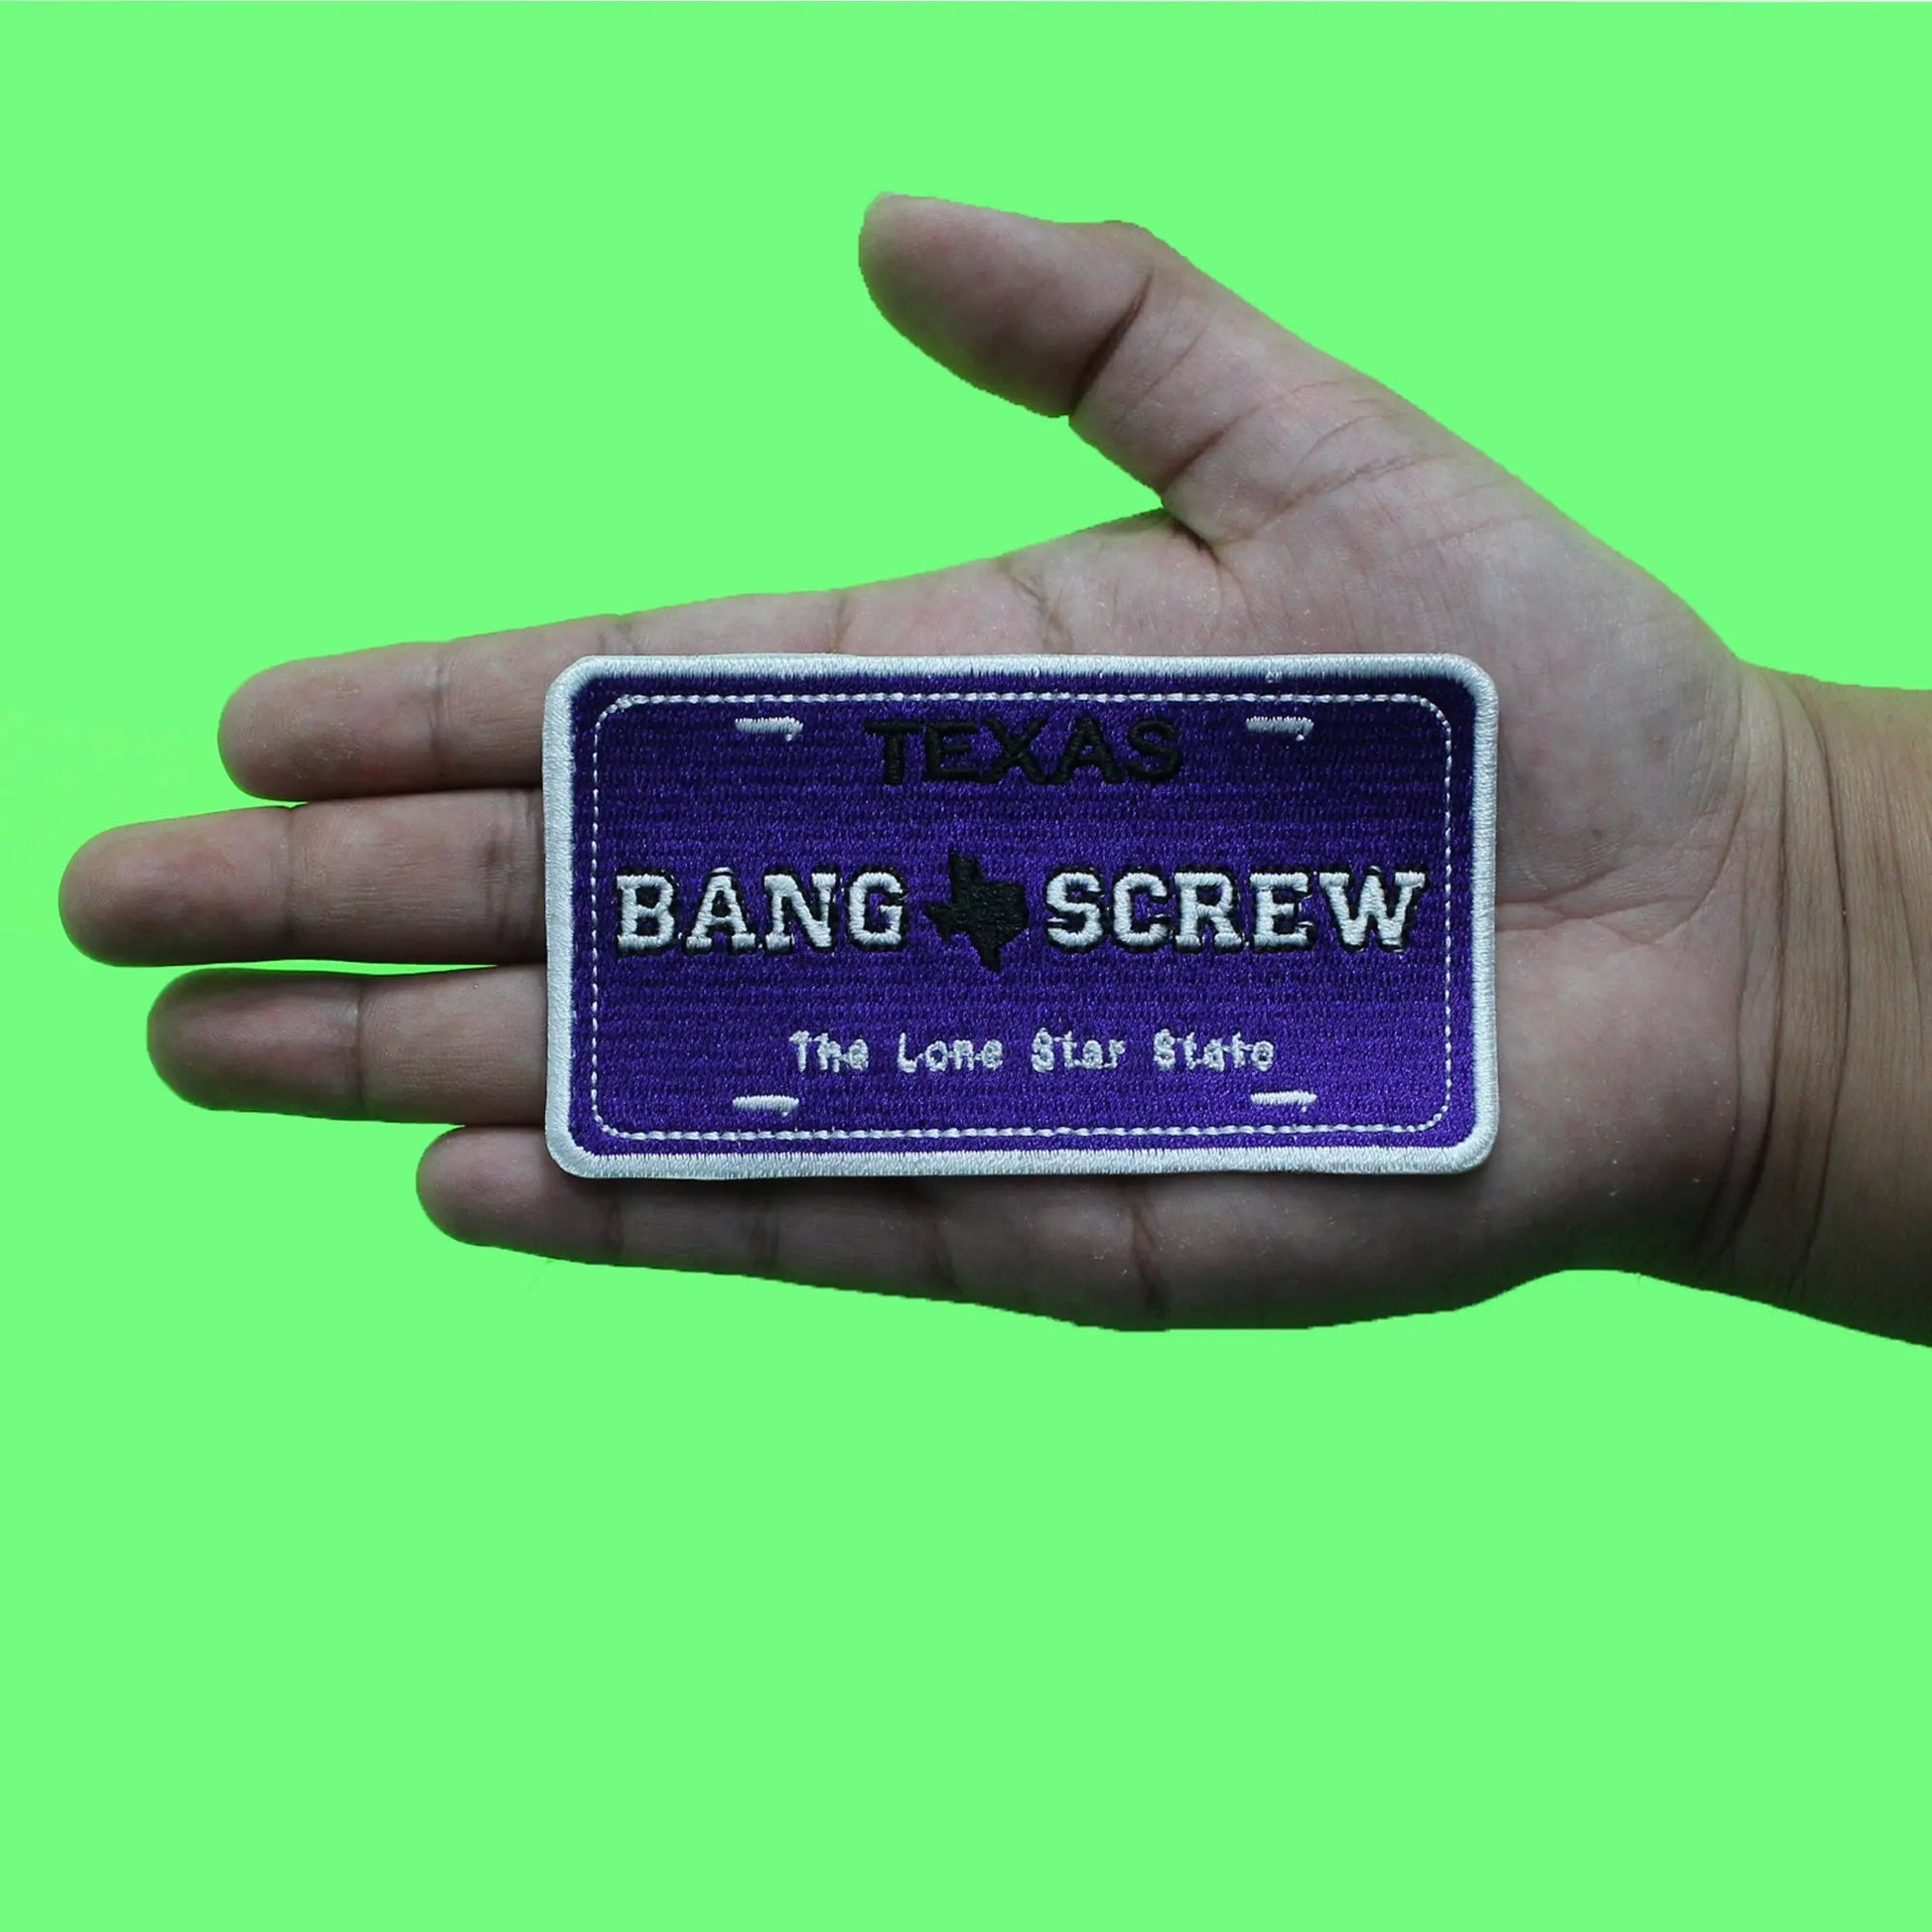 Bang Screw License Plate Patch Houston Texas Embroidered Iron On